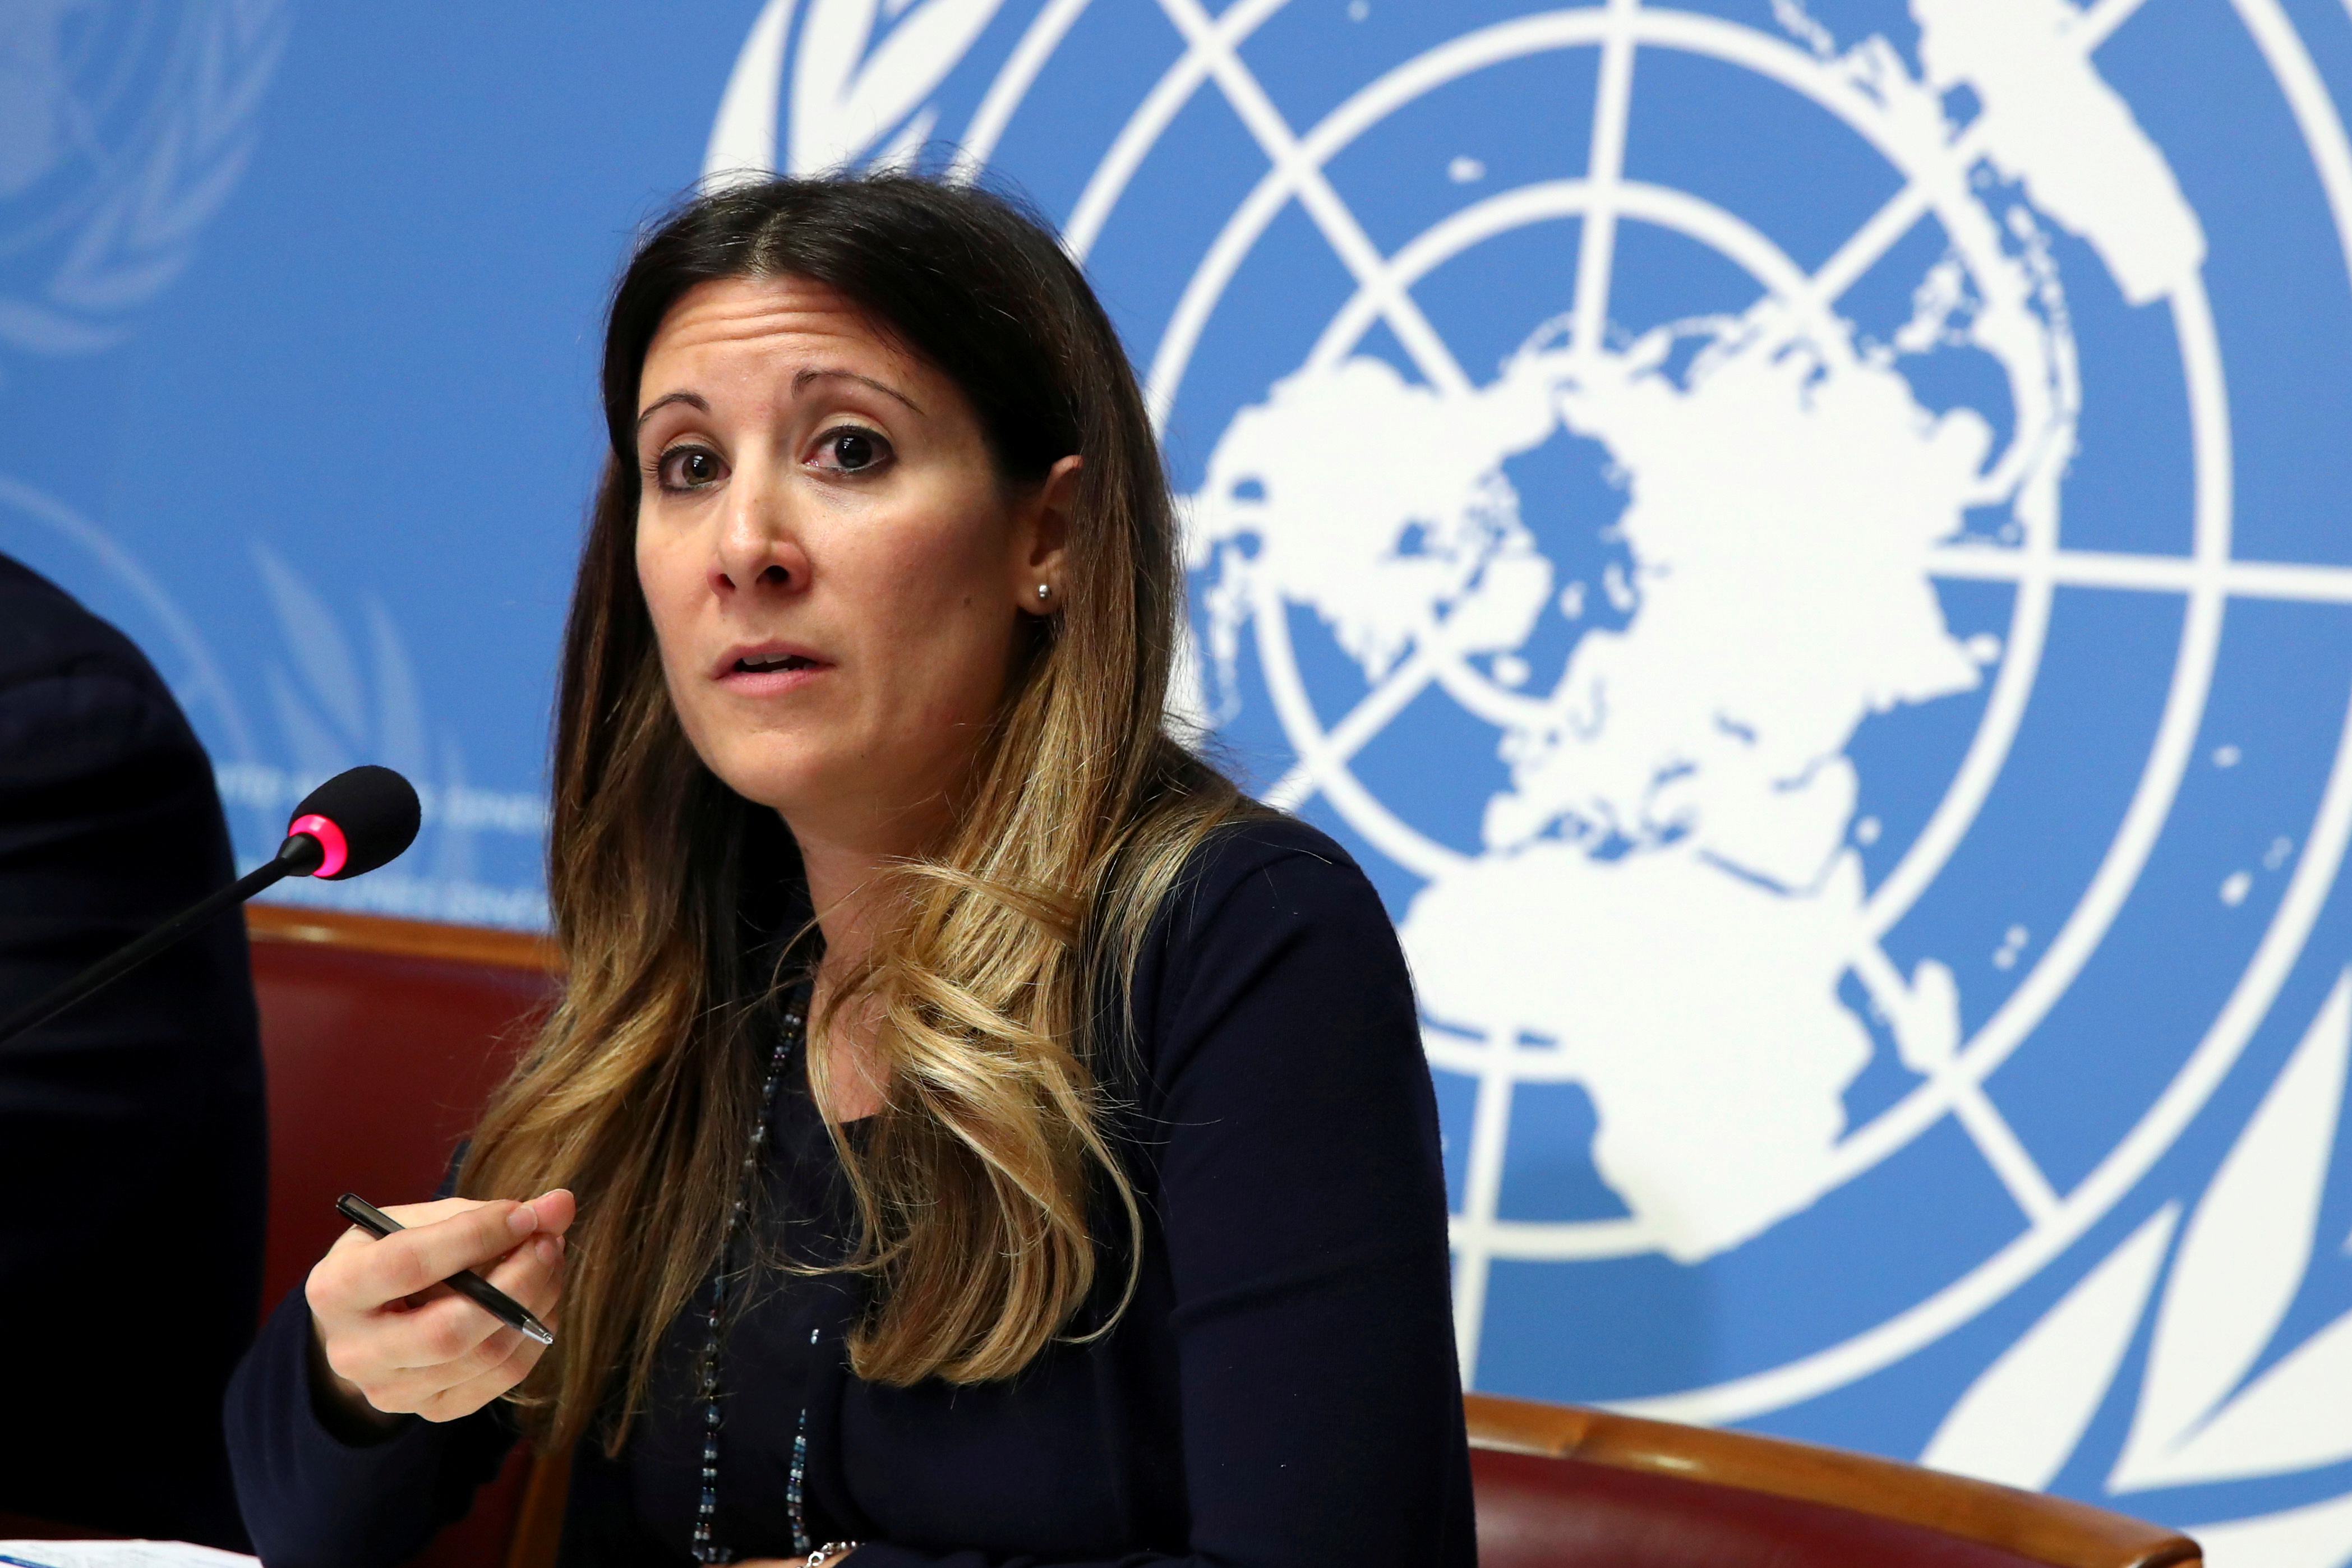 Maria Van Kerkhove, Head a.i. Emerging Diseases and Zoonosis at the World Health Organization (WHO), speaks during a news conference on the situation of the coronavirus, in Geneva